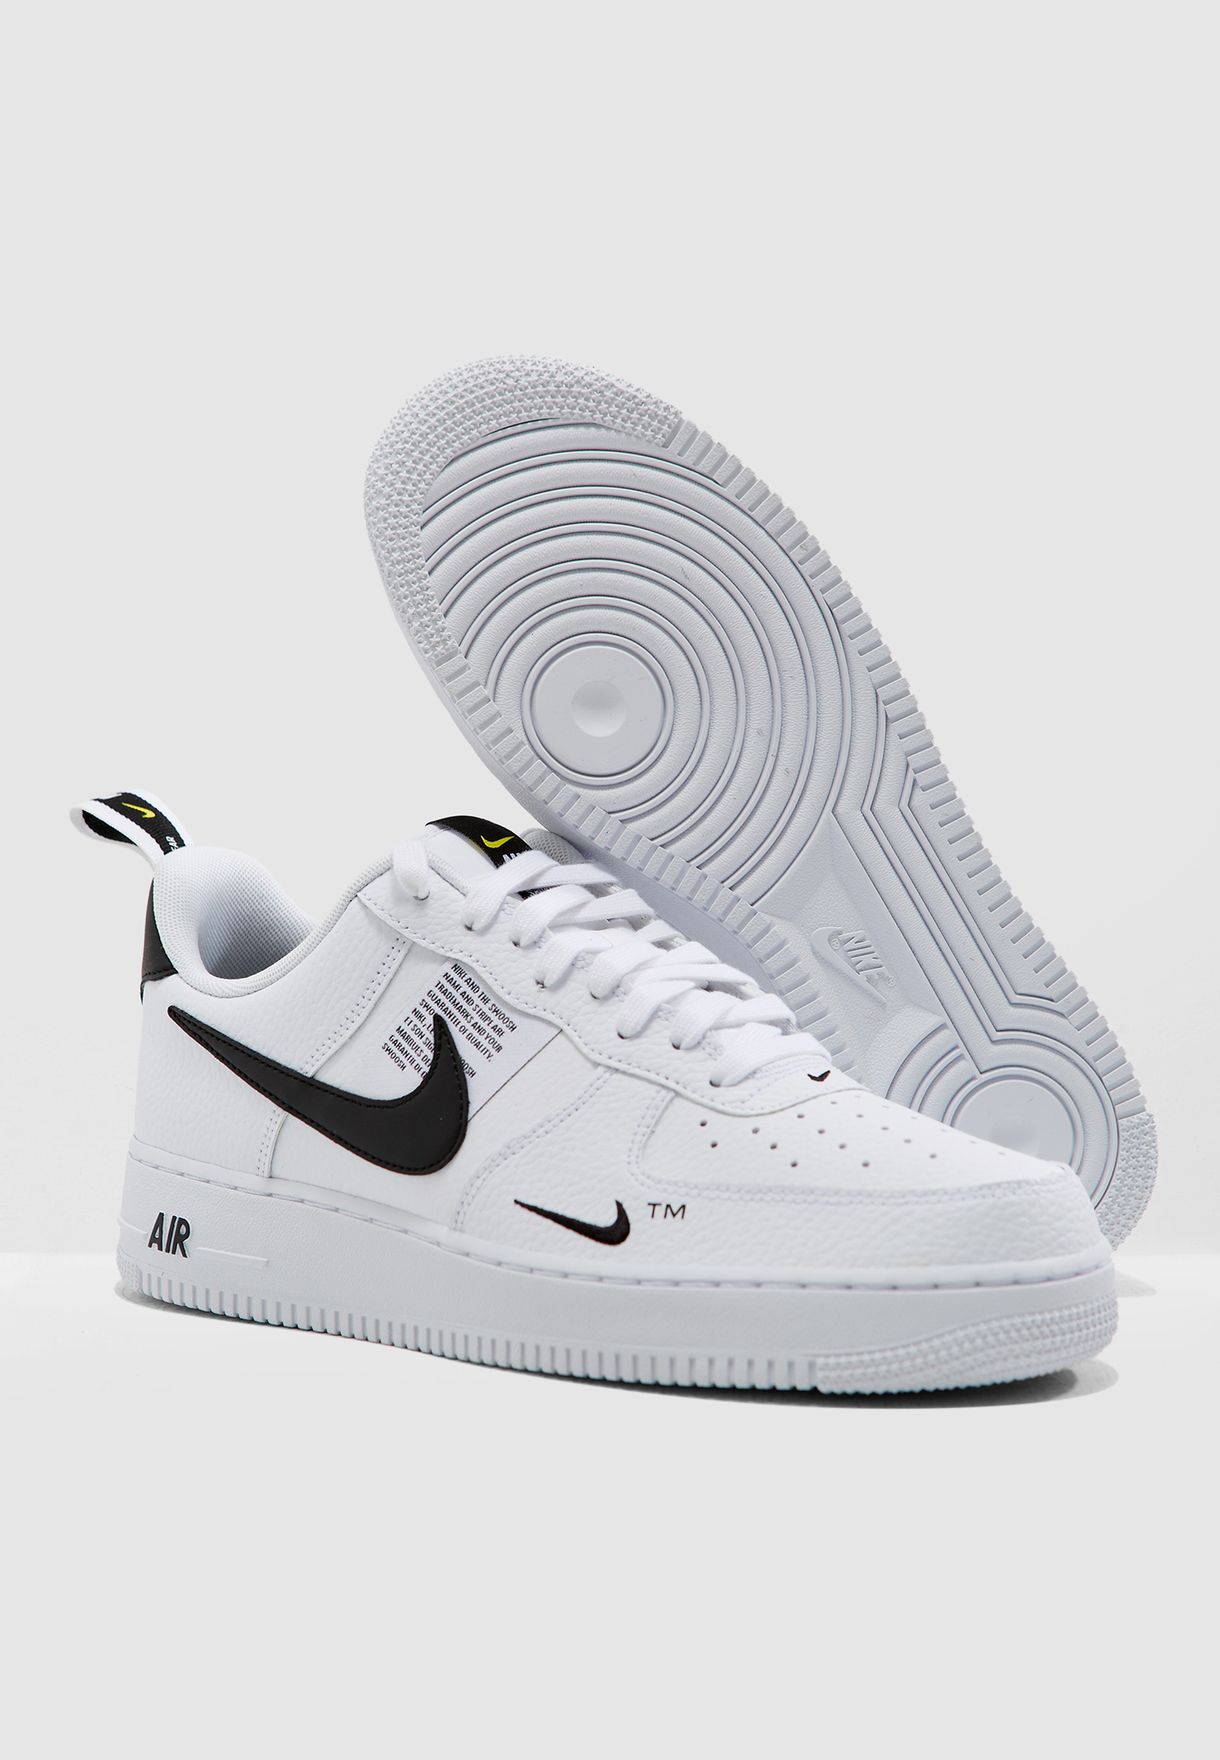 nike air force 1 utility size 7